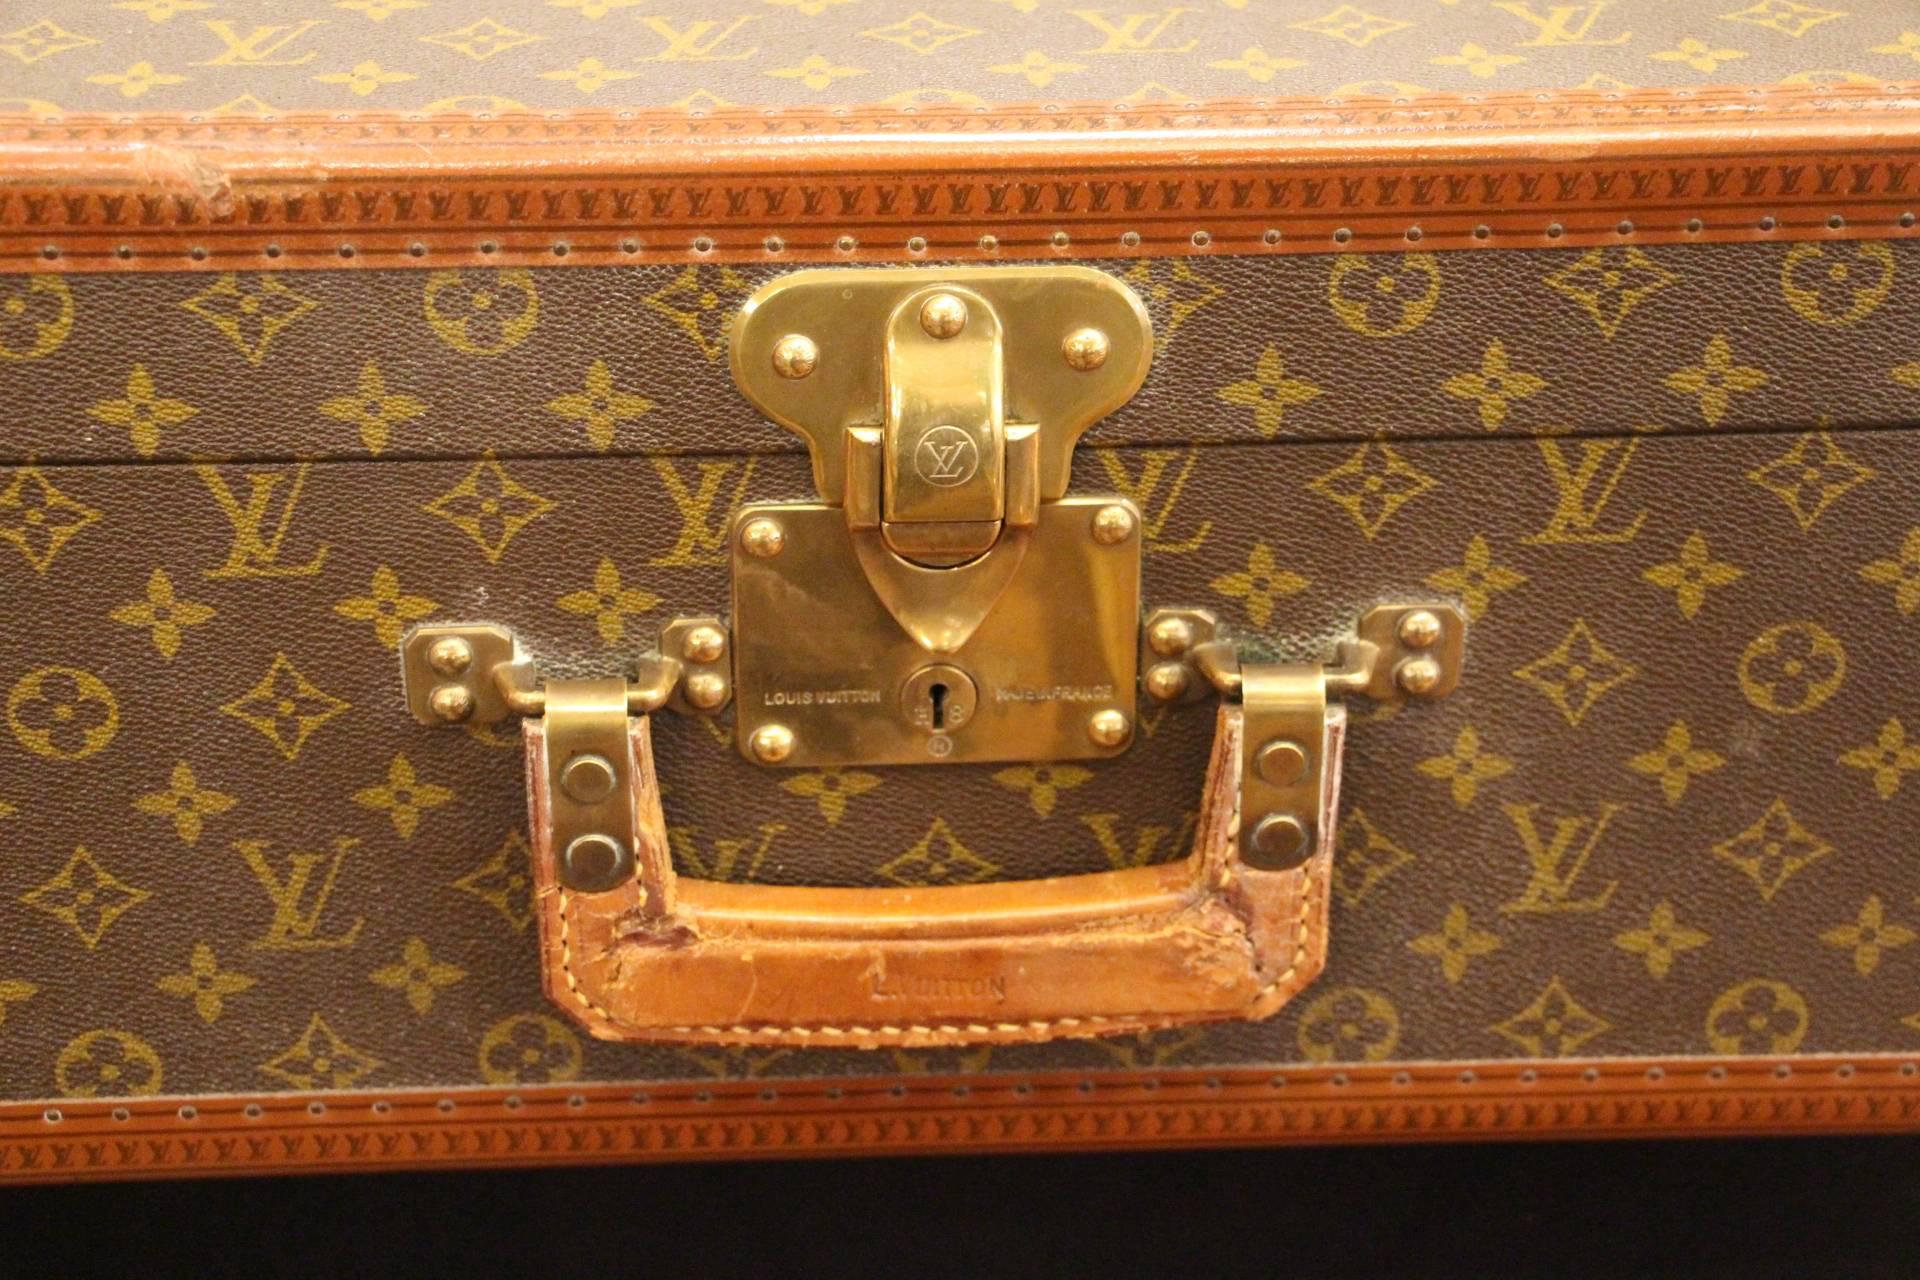 Very nice Louis Vuitton suitcase in monogramm, leather square handle and brass locks and corners. Clean interior.